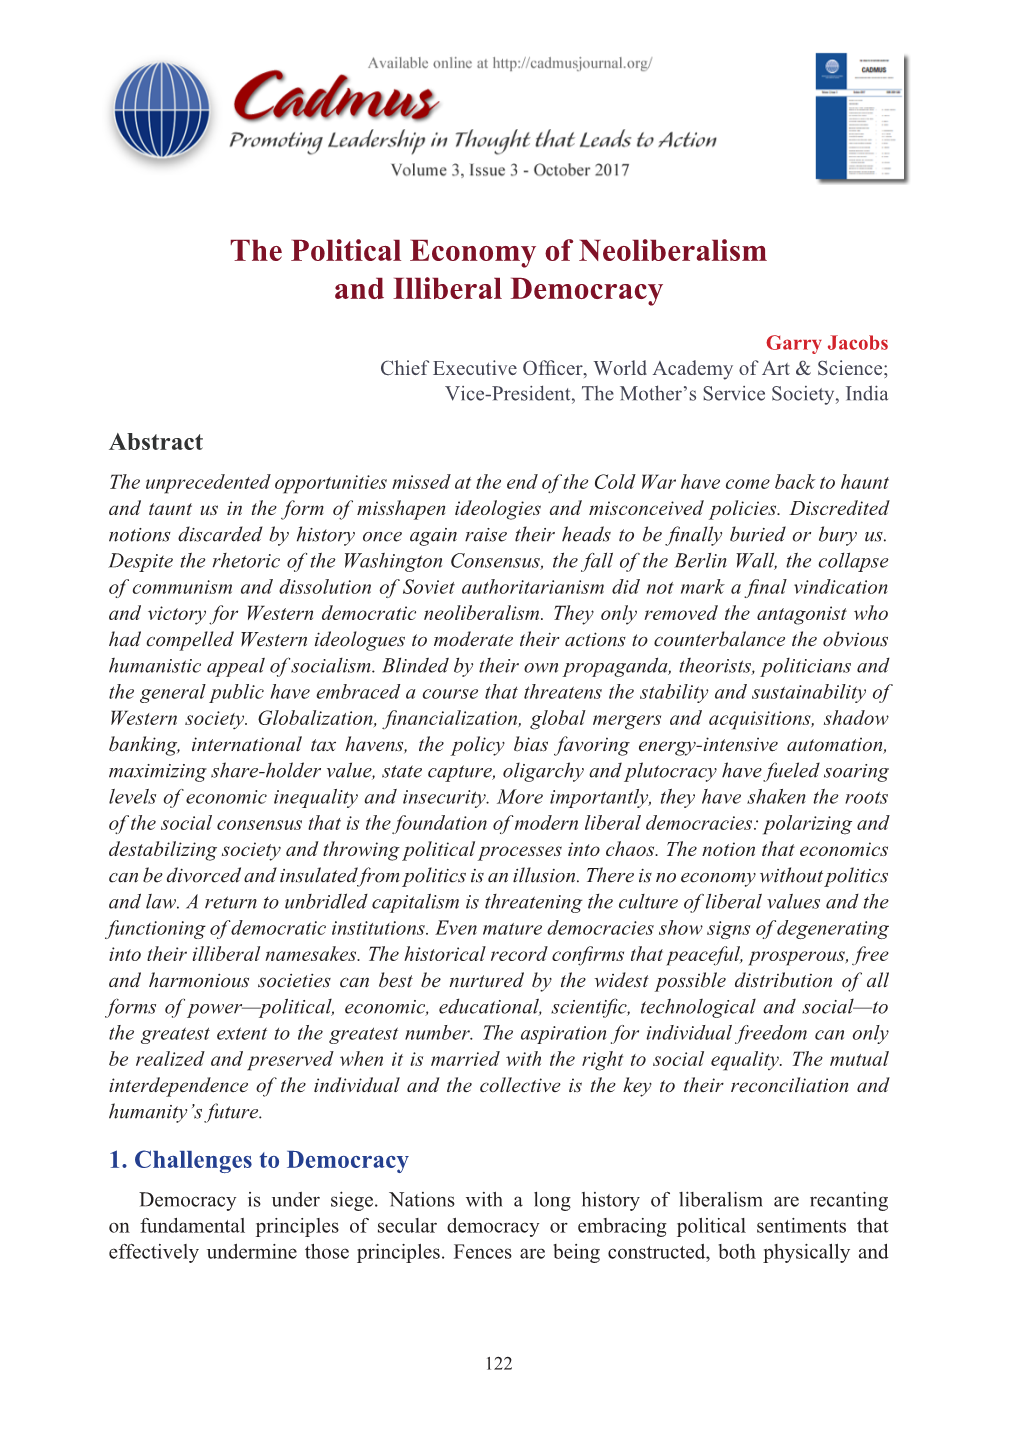 The Political Economy of Neoliberalism and Illiberal Democracy